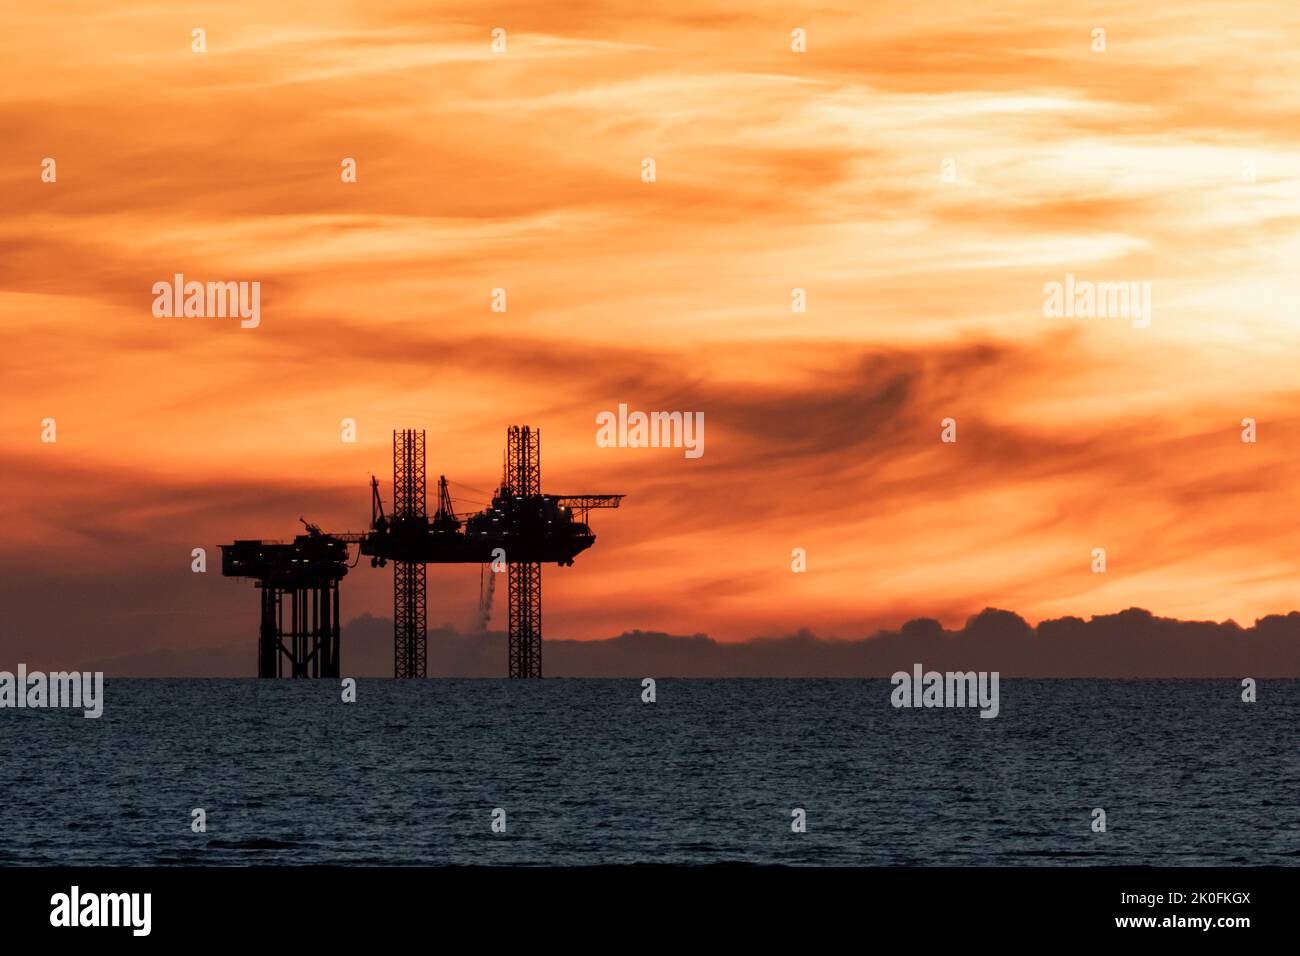 Oil rig sunset, sunset over Lennox satellite platform in the Irish Sea, part of the Douglas Complex oil and gas rigs in Liverpool Bay, England, UK Stock Photo